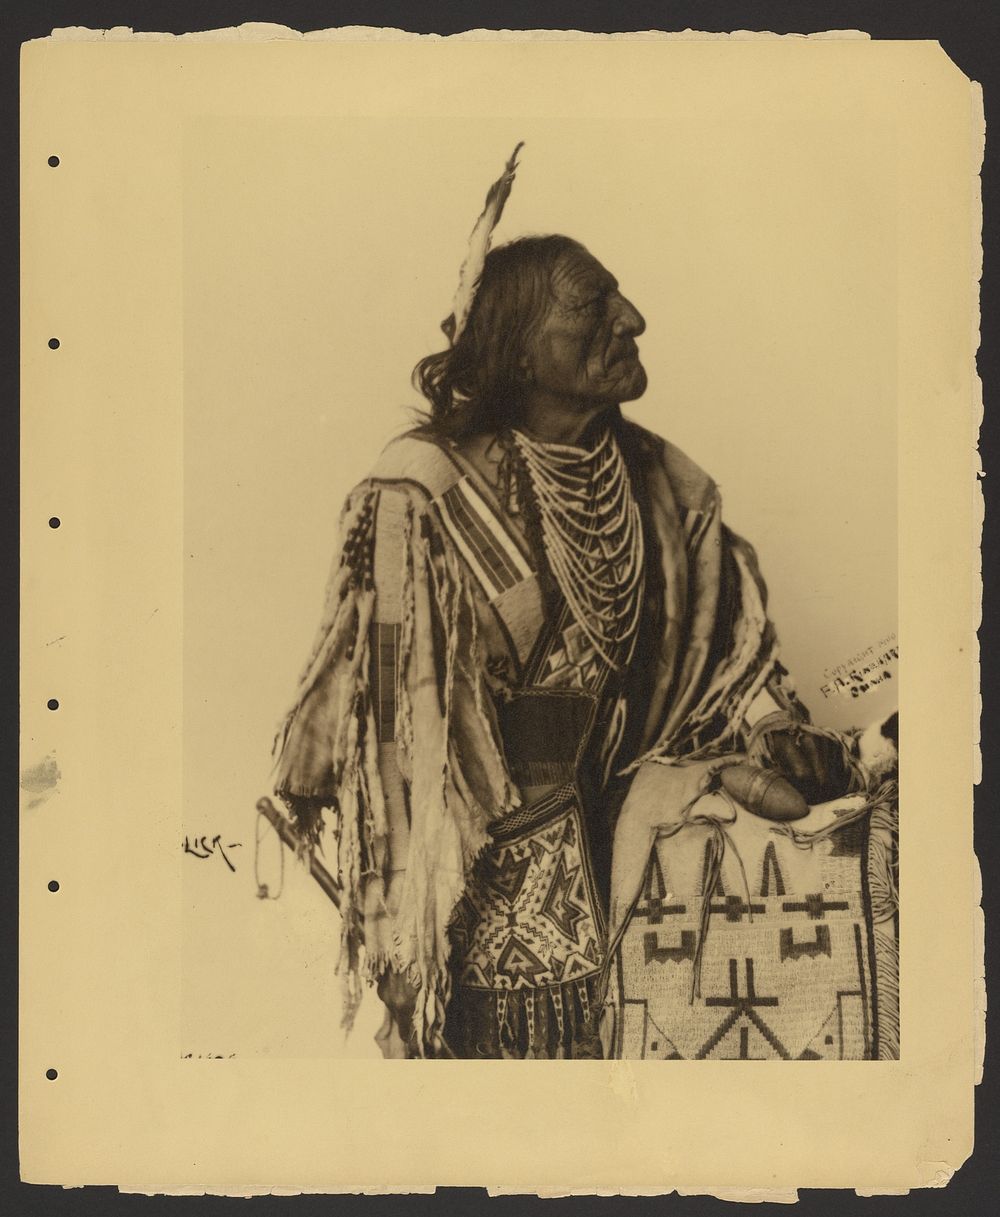 Chief Lick, Sioux by Adolph F Muhr and Frank A Rinehart